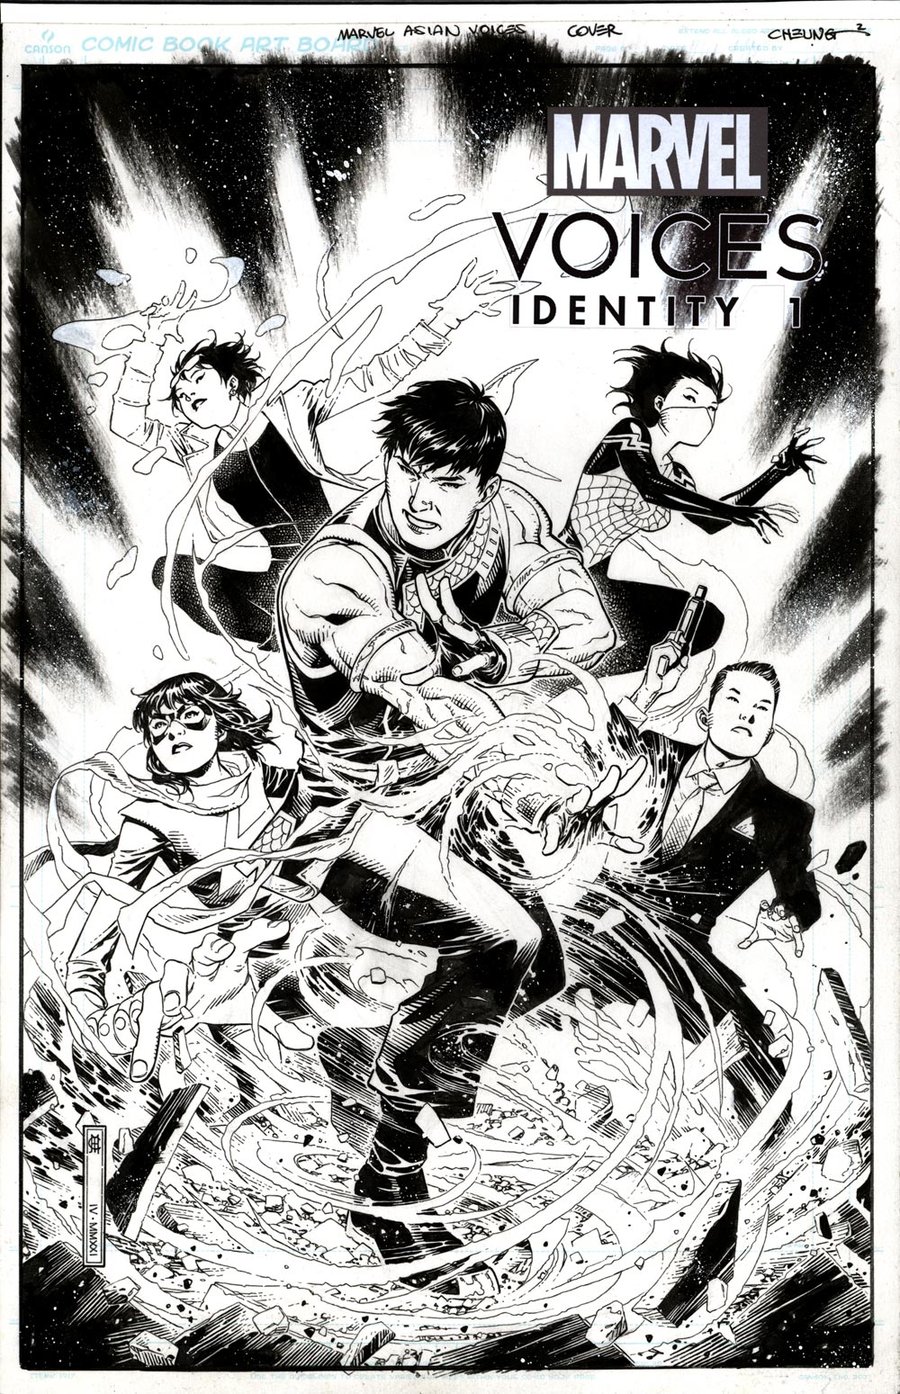 Image of MARVEL VOICES-IDENTITY Cover 